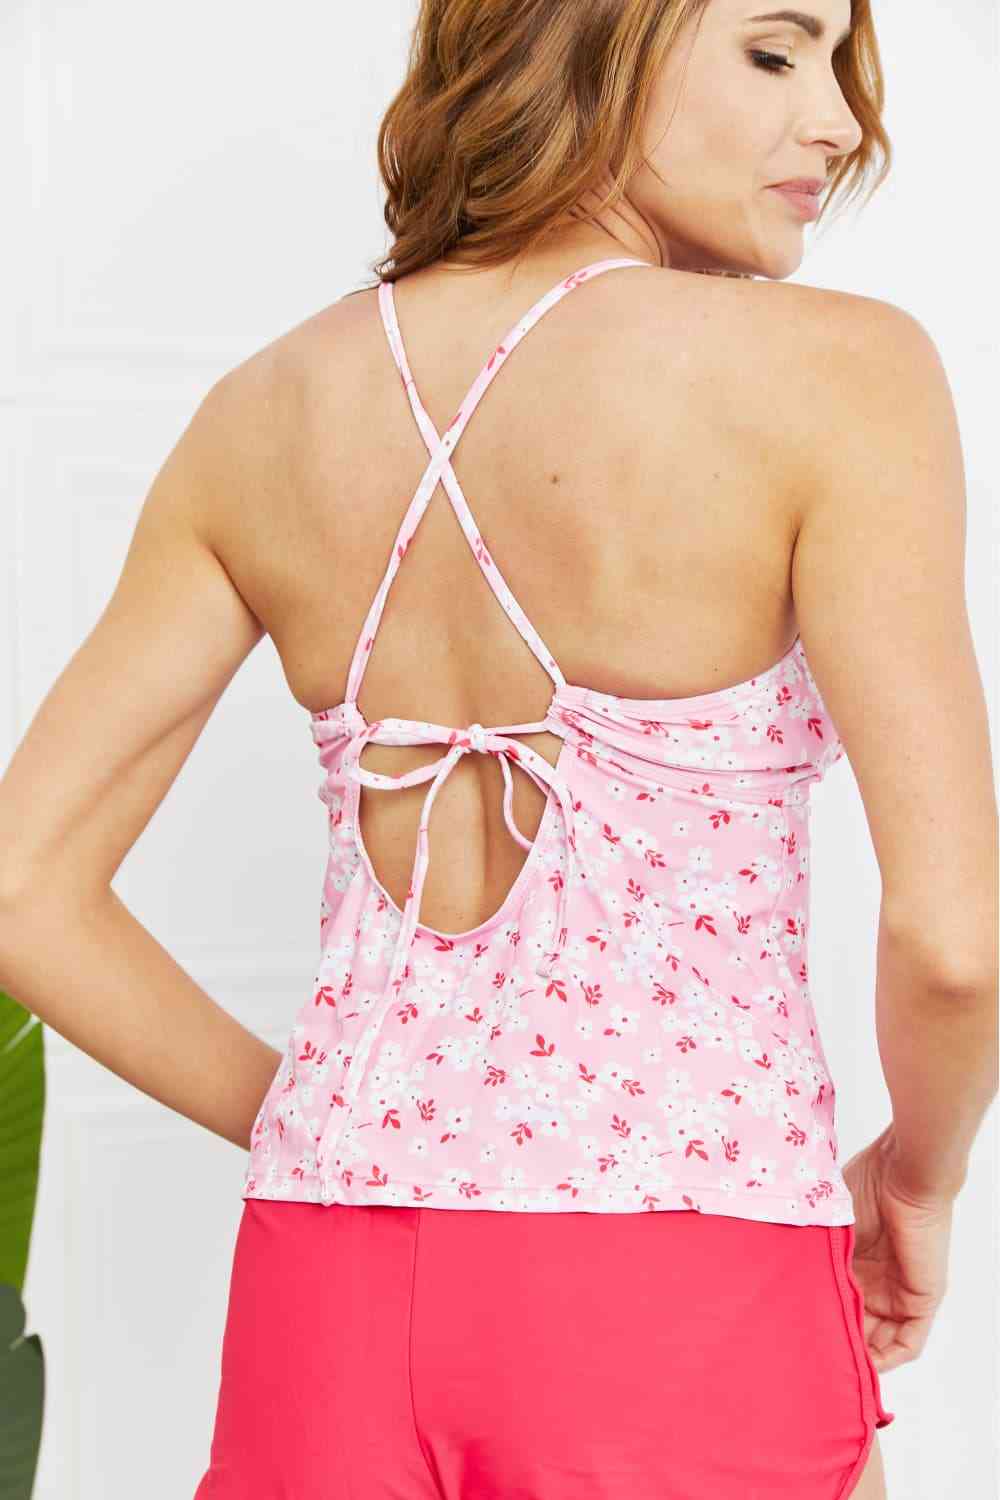 Women's Marina West Swim By The Shore Full Size Two-Piece Swimsuit in Blossom Pink